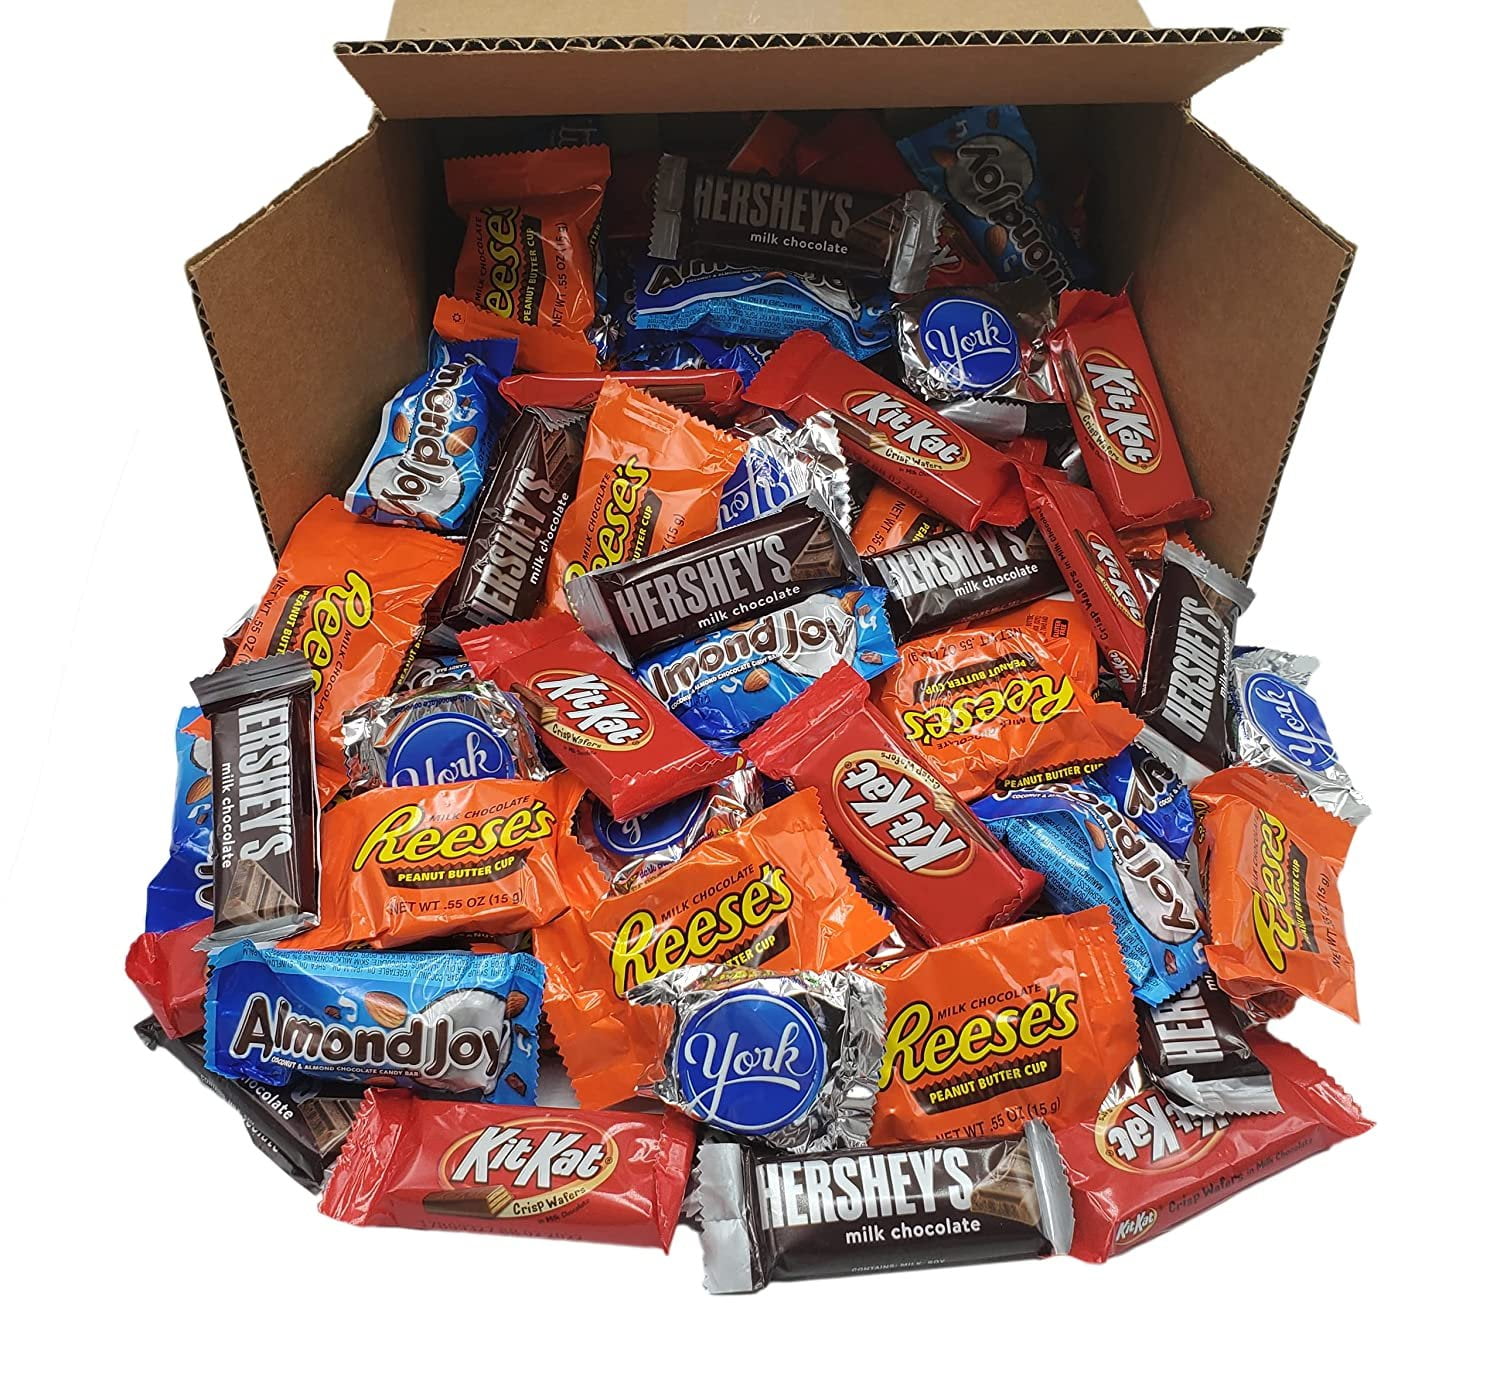 Butterfinger  Co. Bulk Chocolate-y Candy Bag, Mix of Fun Size Butterfinger,  Crunch, Baby Ruth  100 Grand Milk Chocolate-y Bars, 39.8 oz, 70 Count -  Walmart.com